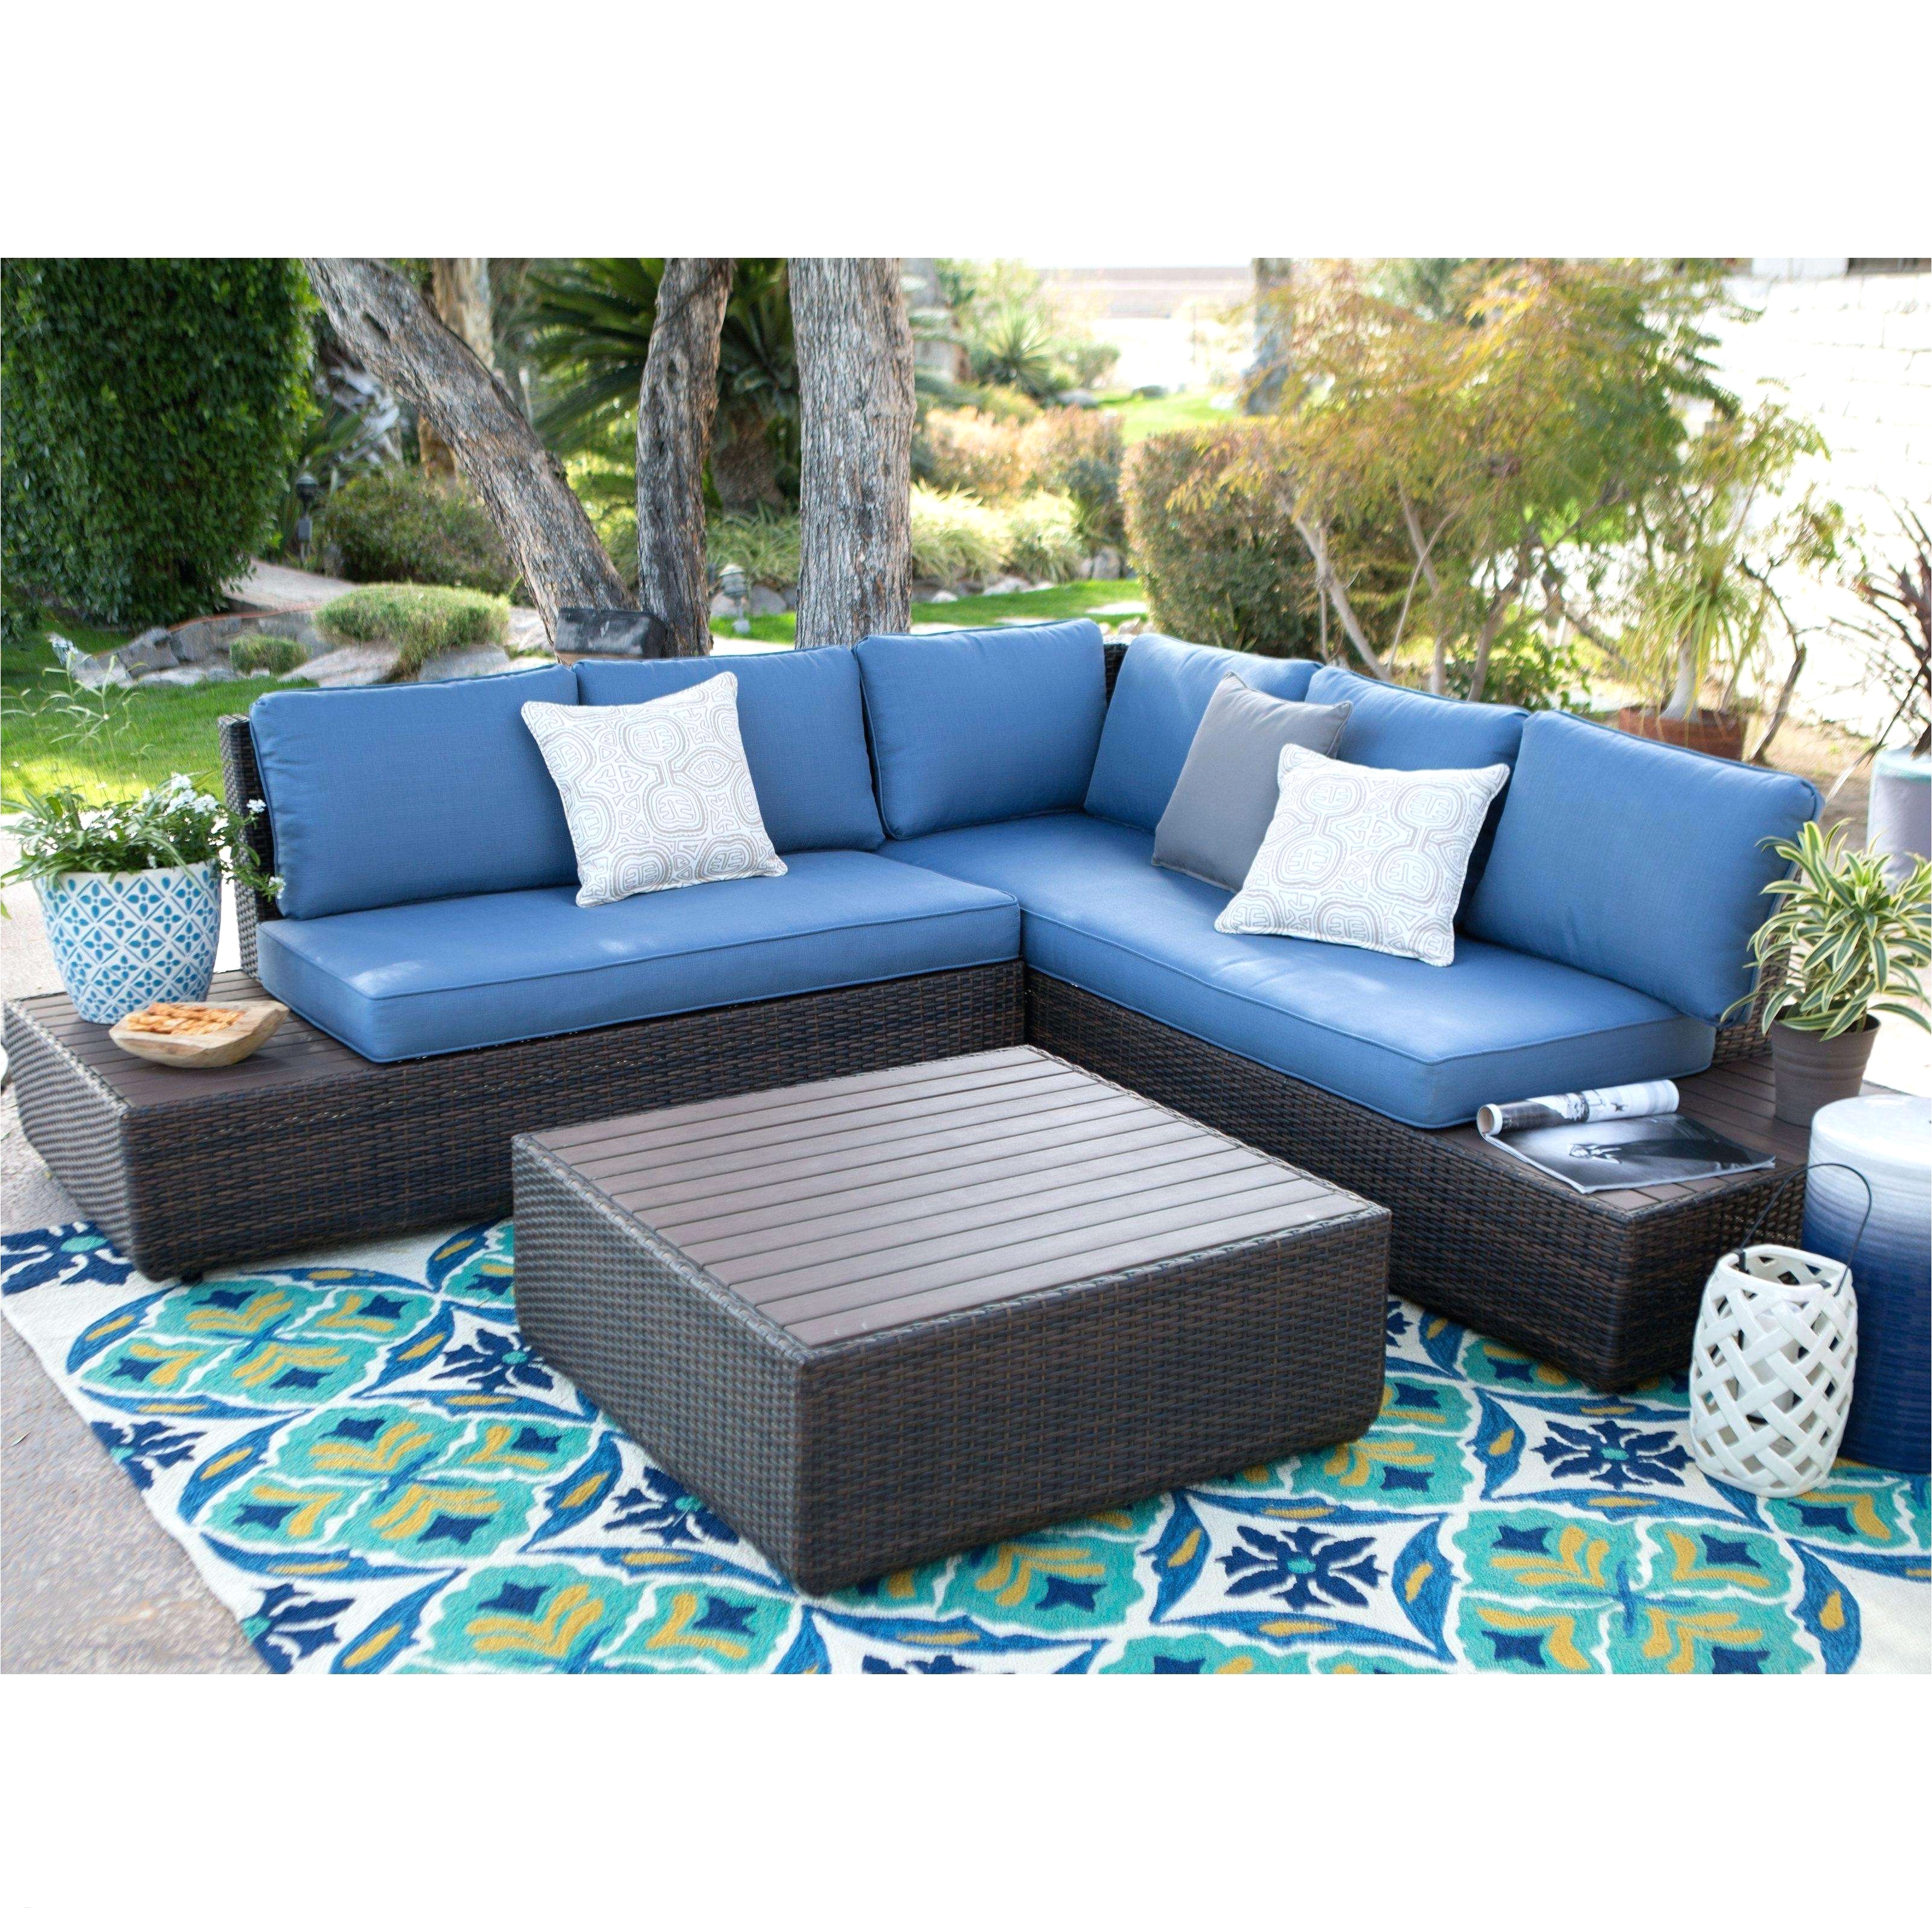 deep seat outdoor cushions inspirational deep seat patio cushions replacements elegant wicker outdoor sofa 0d of deep seat outdoor cushions jpg